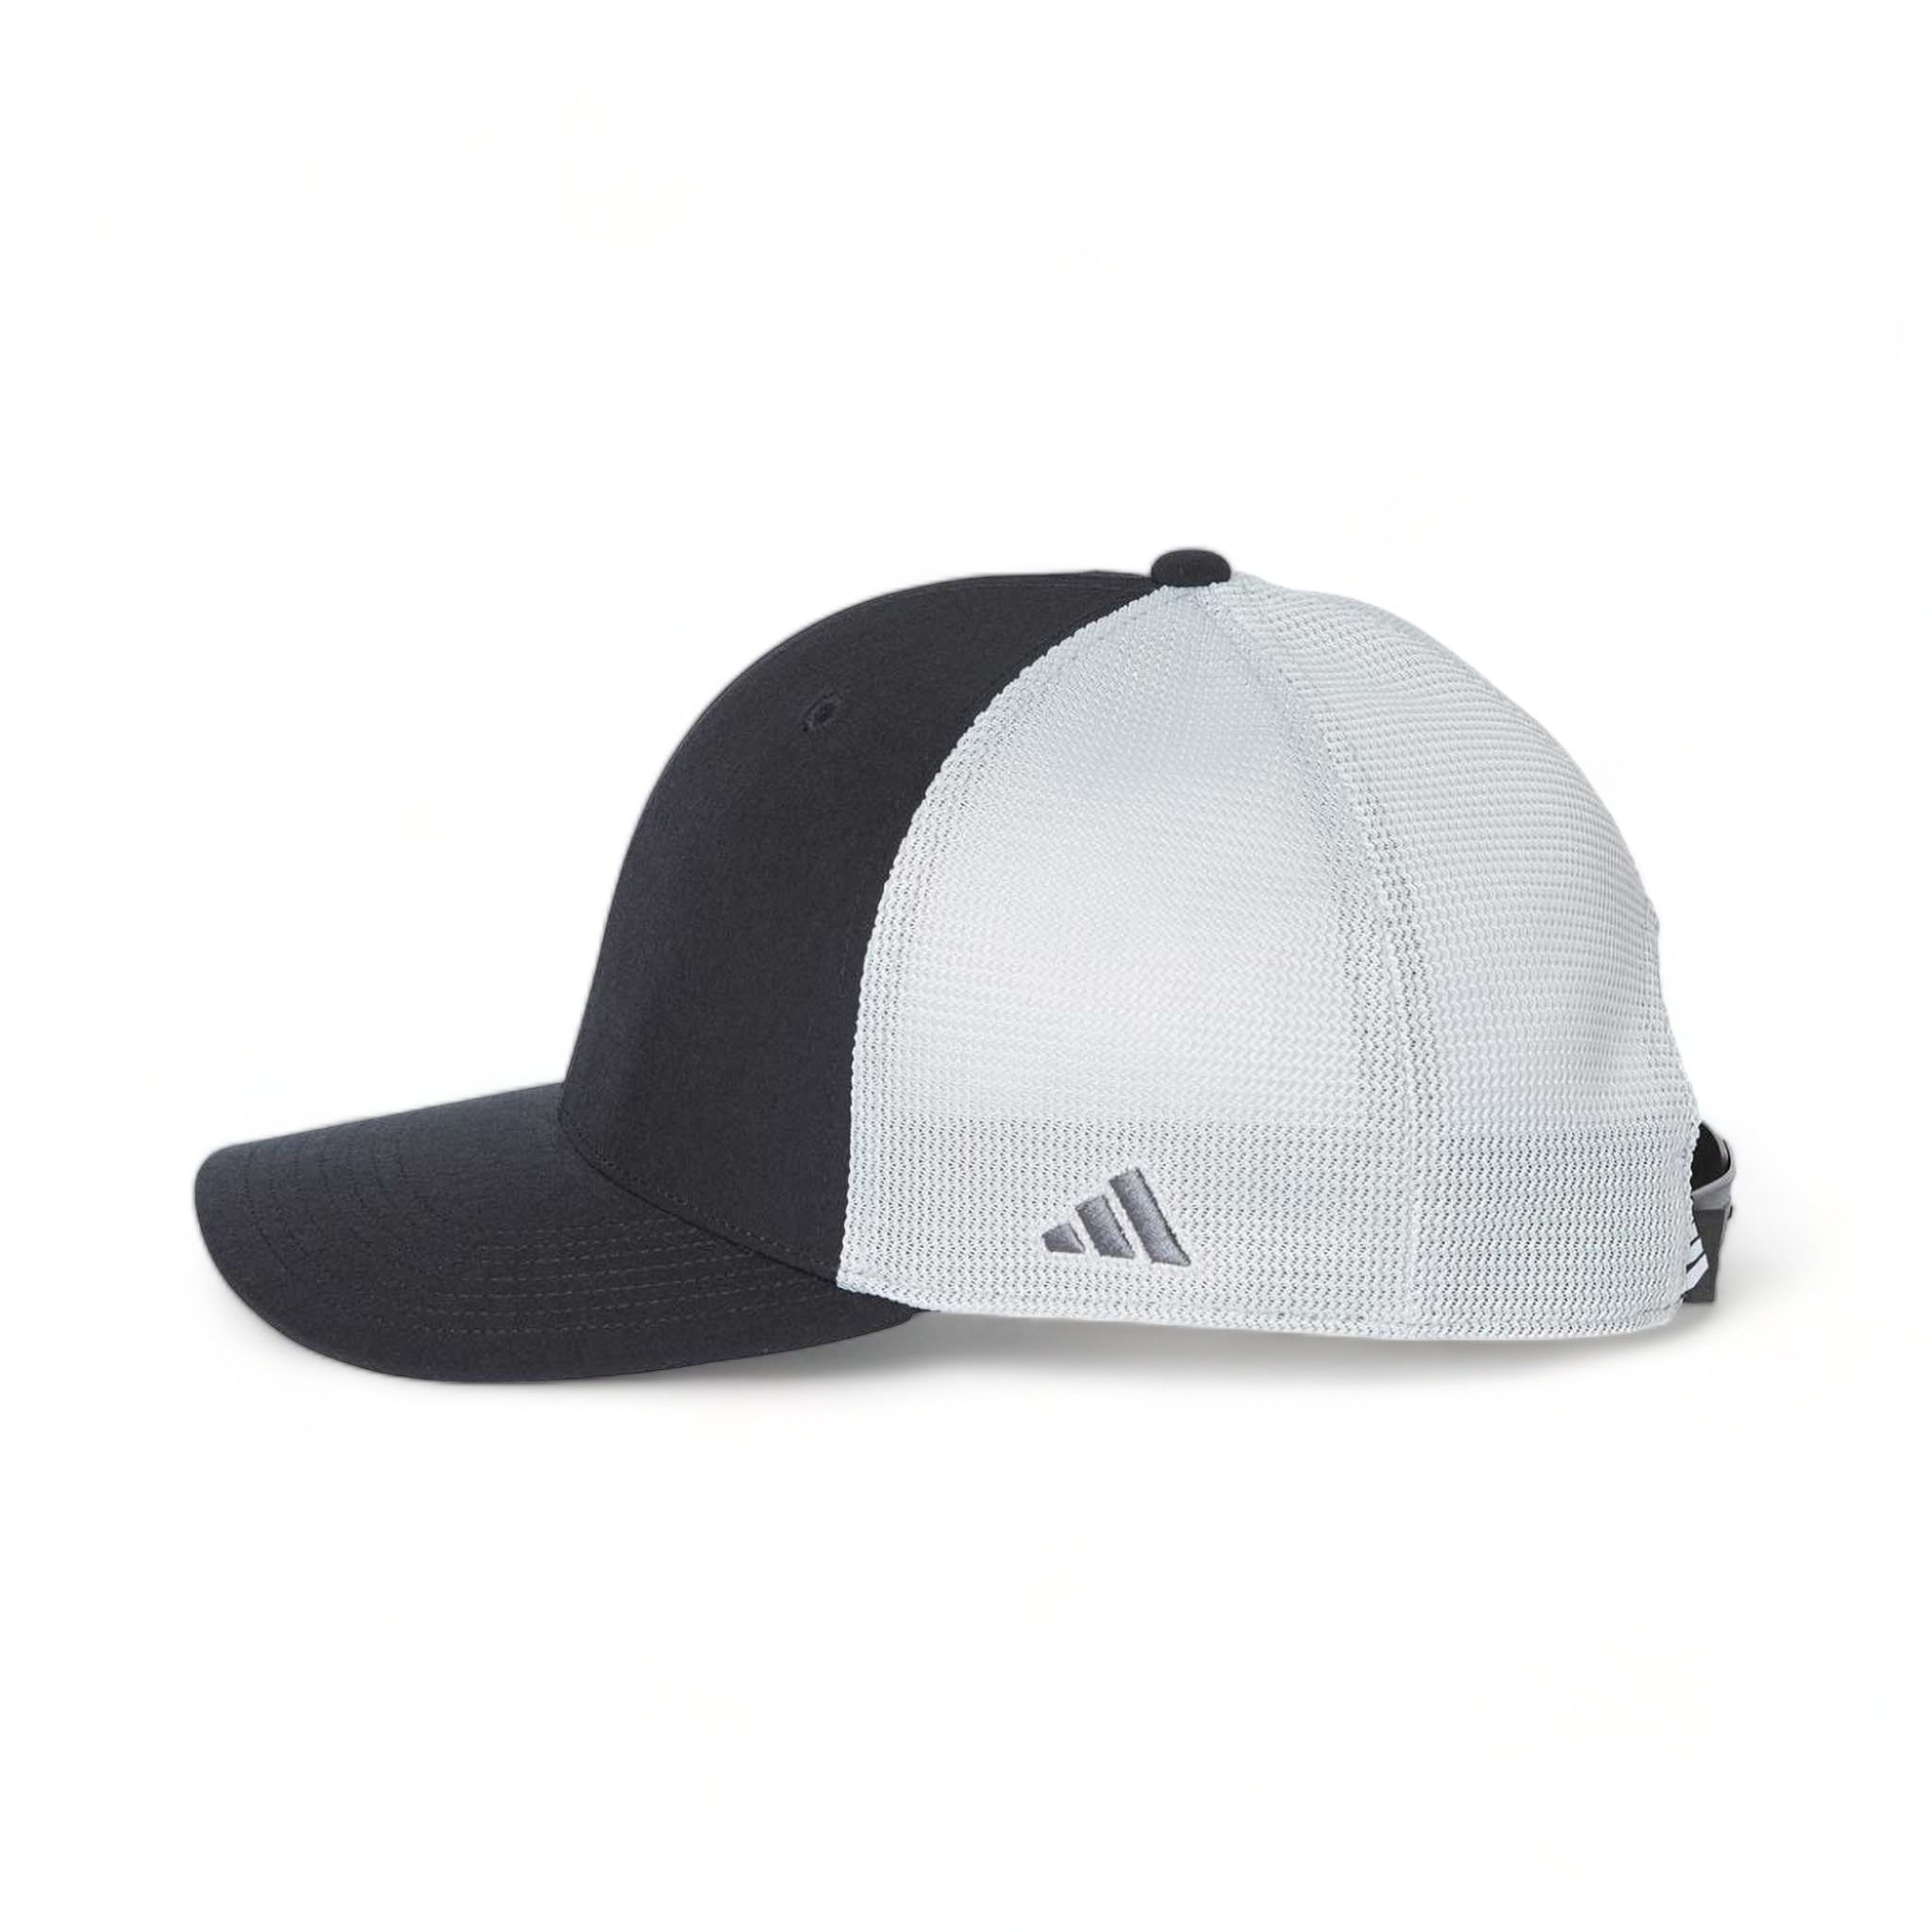 Side view of Adidas A627S custom hat in black